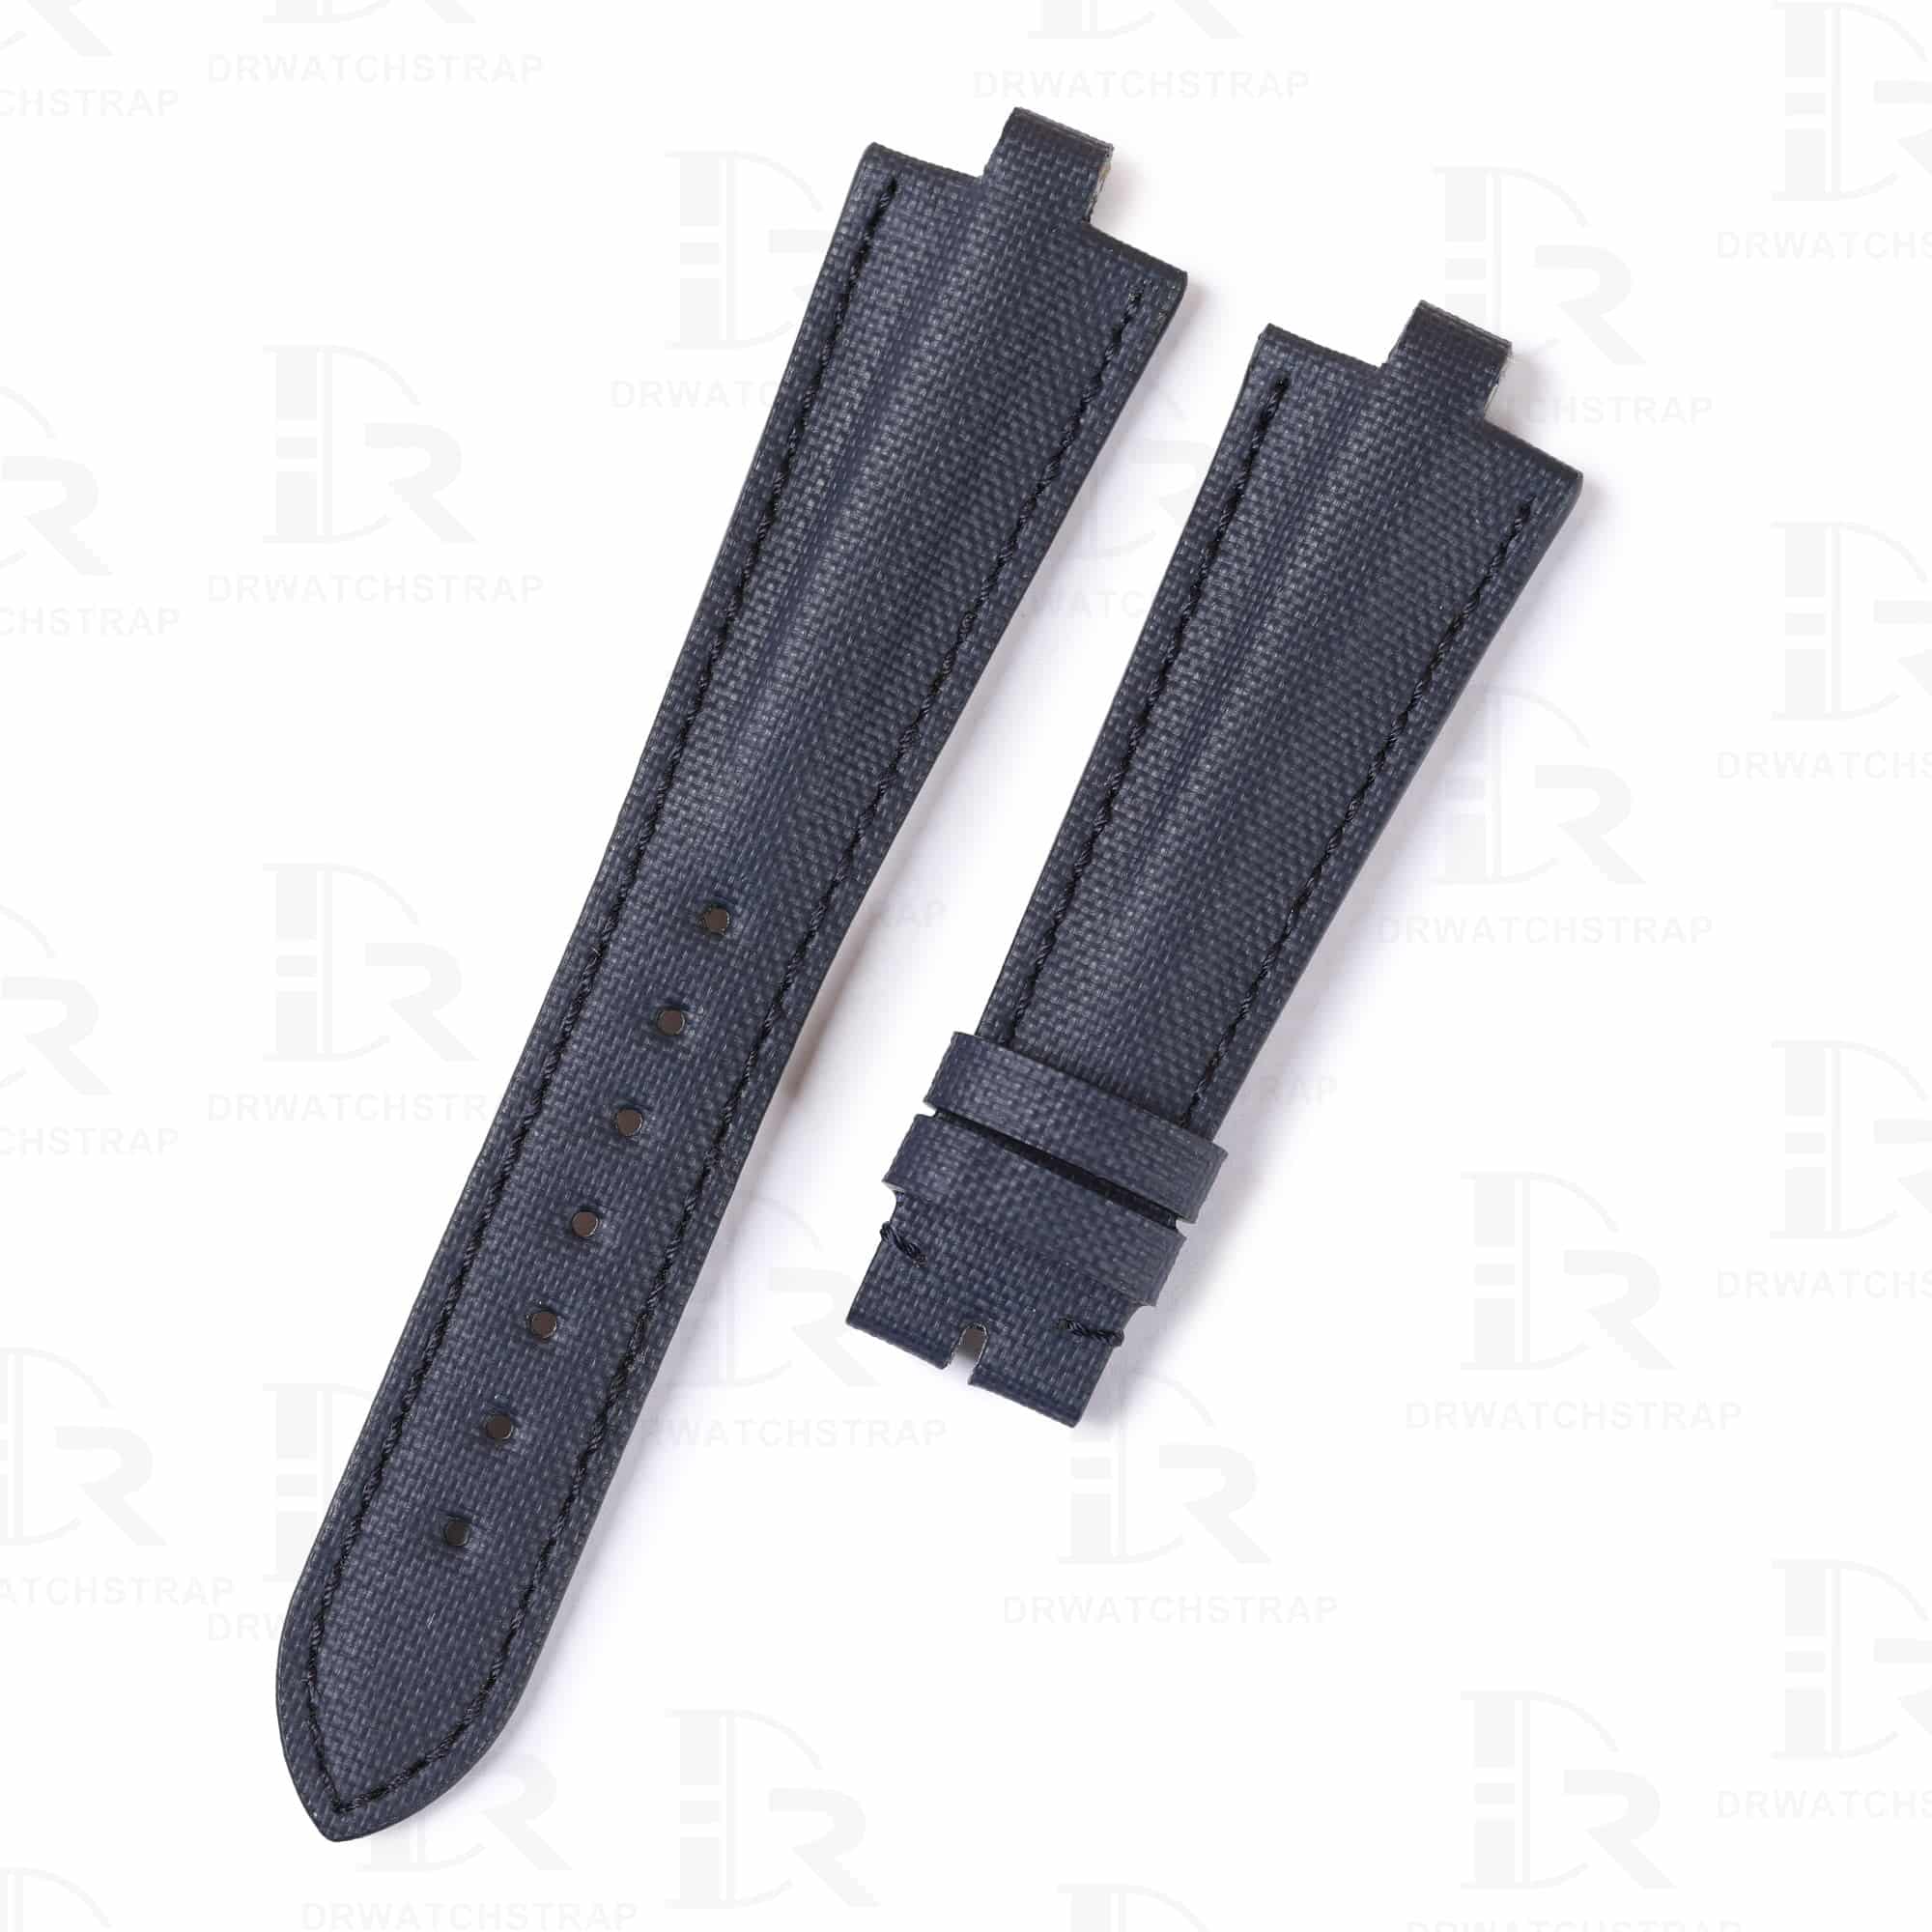 Custom high-end quality blue nylon canvas replacement watch strap & watch band for Bvlgari Diagono Aluminium al38a L3276 watch from DRWatchstrap online - Shop the handmade nylon strap with the best kevlar canvas material at a low price